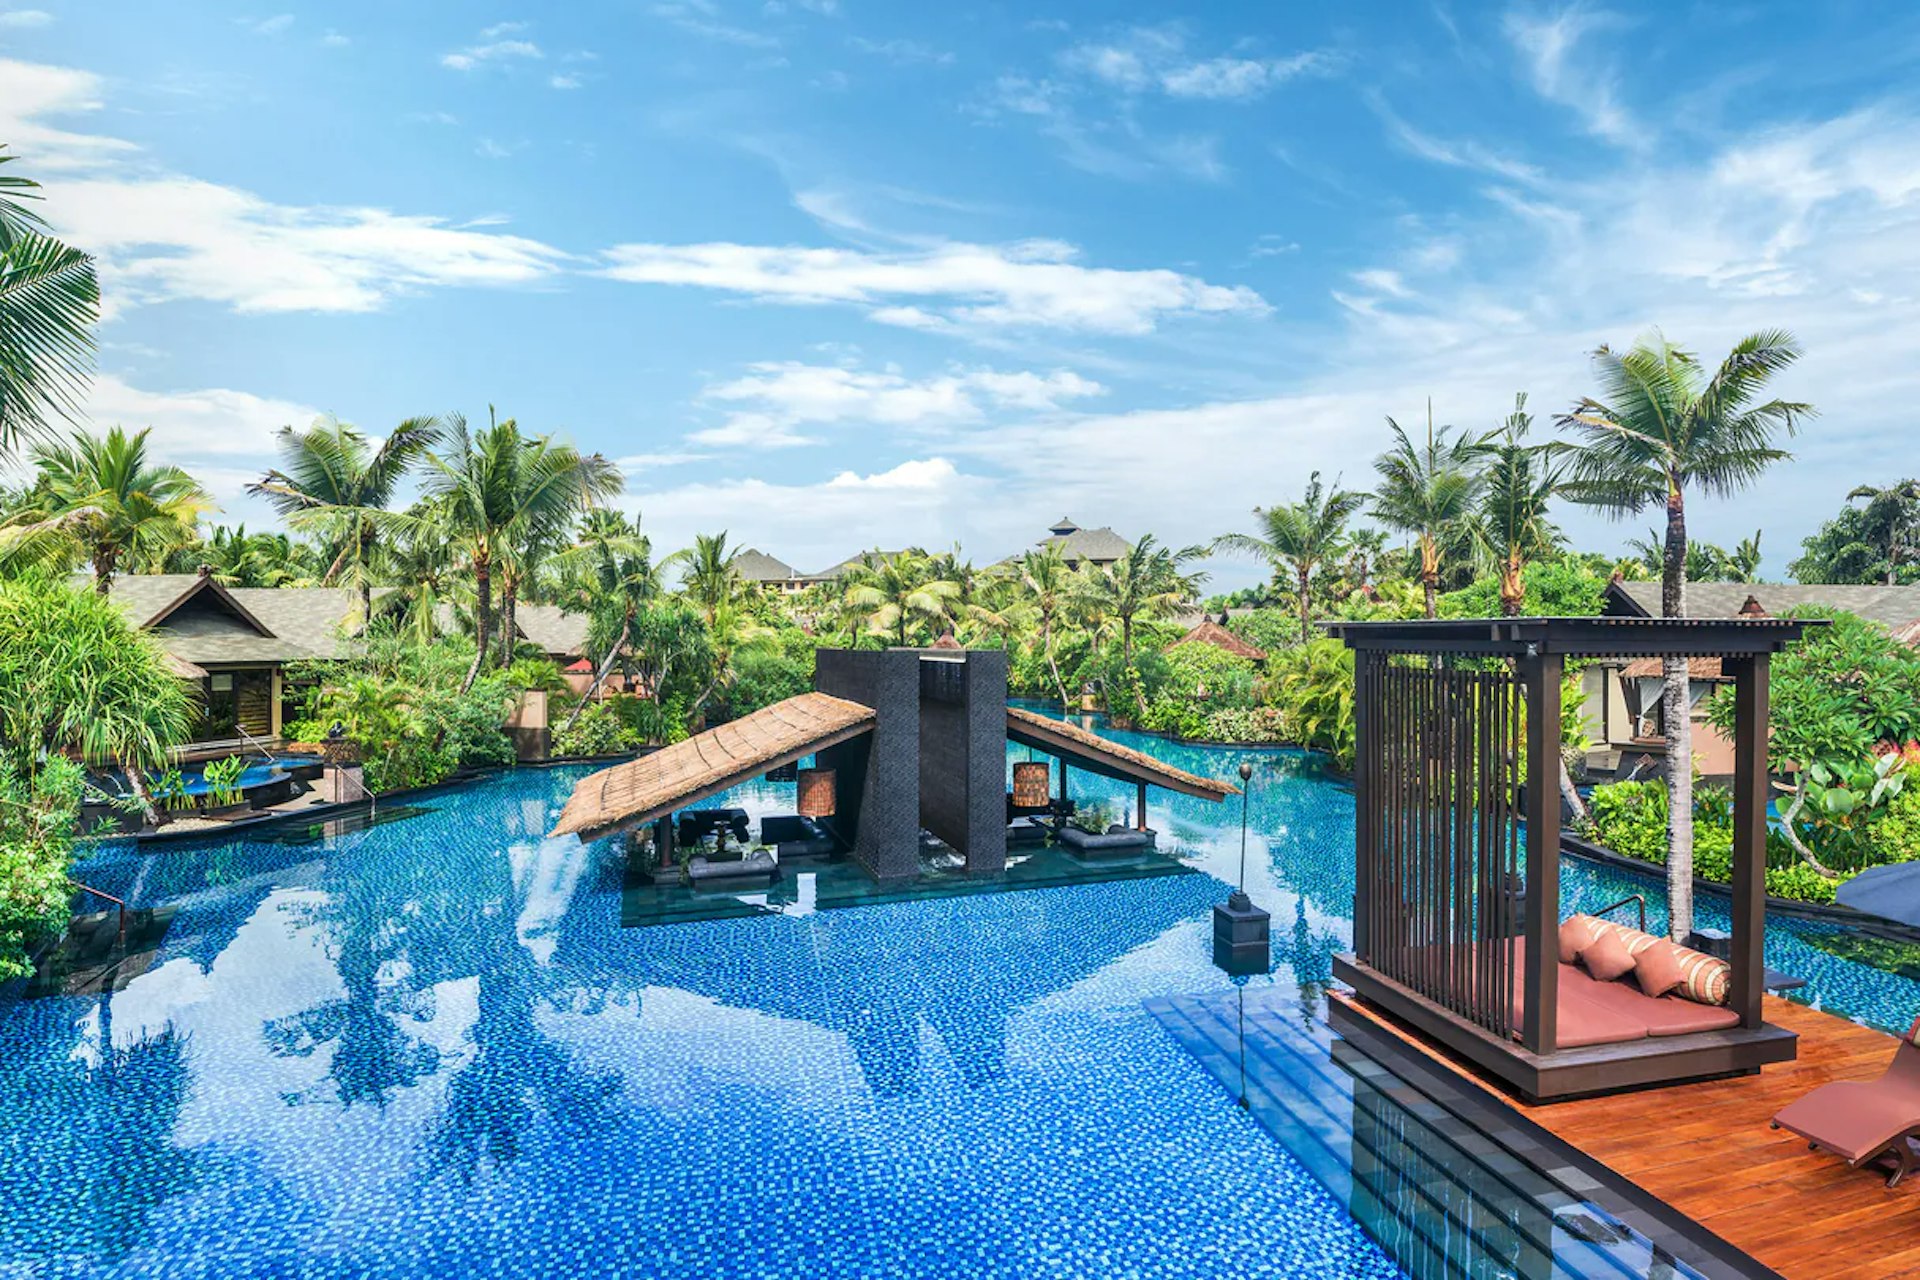 The lagoon pool at the St Regis Bali, with palm trees and sun porches